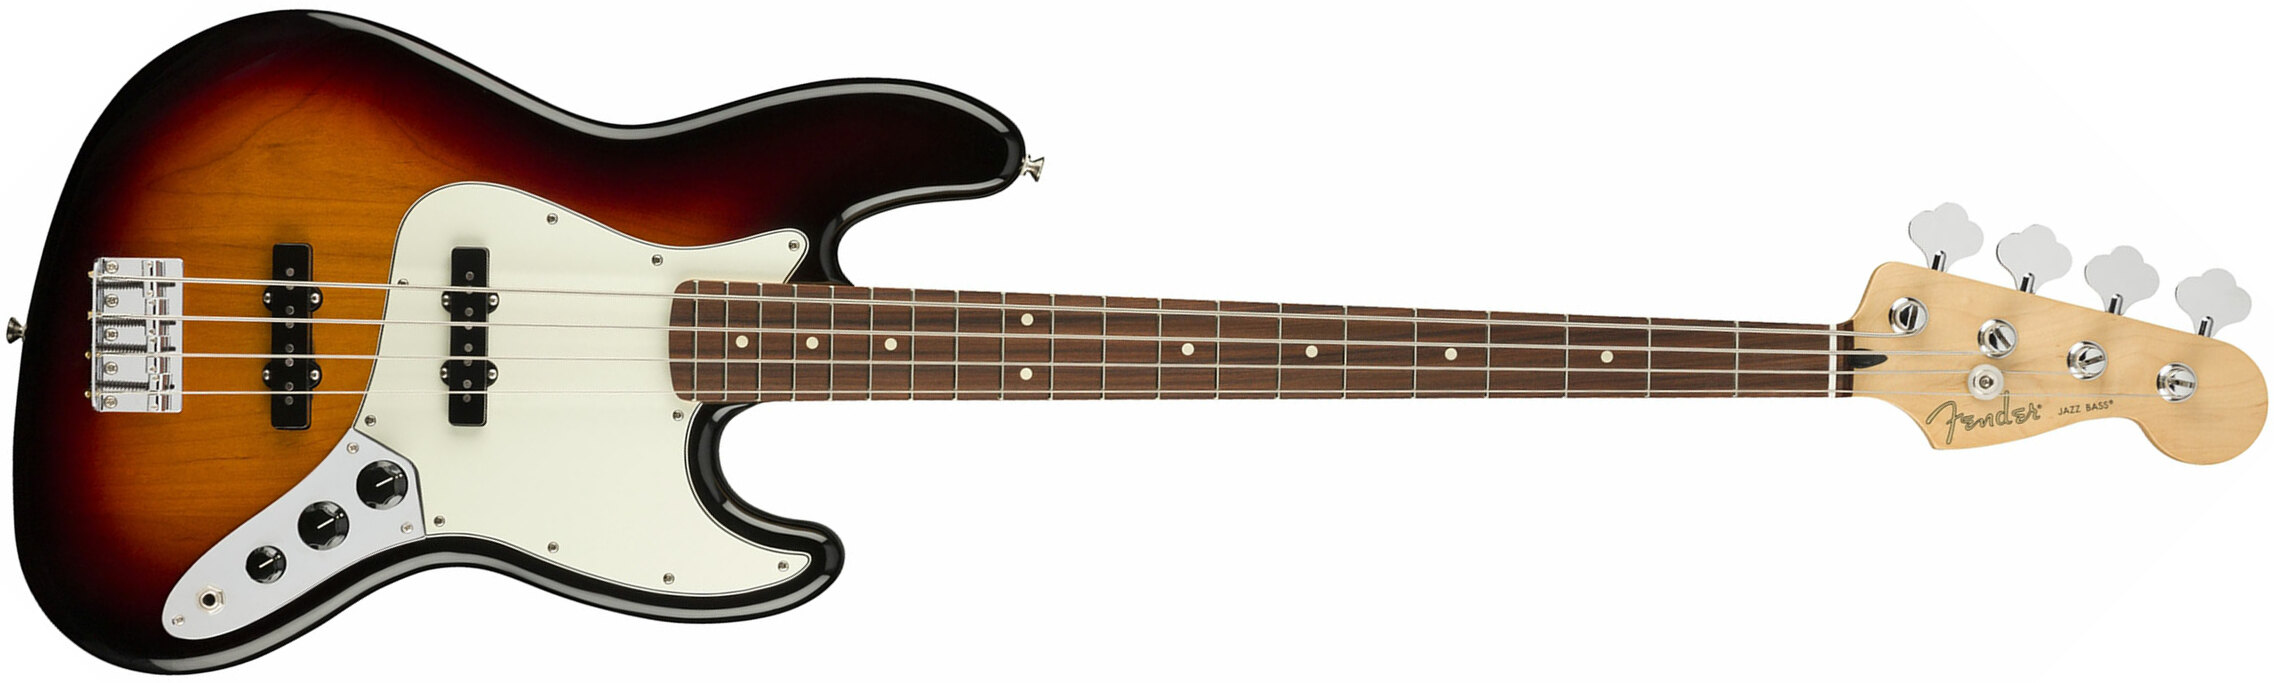 Fender Jazz Bass Player Mex Pf - 3-color Sunburst - Solid body electric bass - Main picture